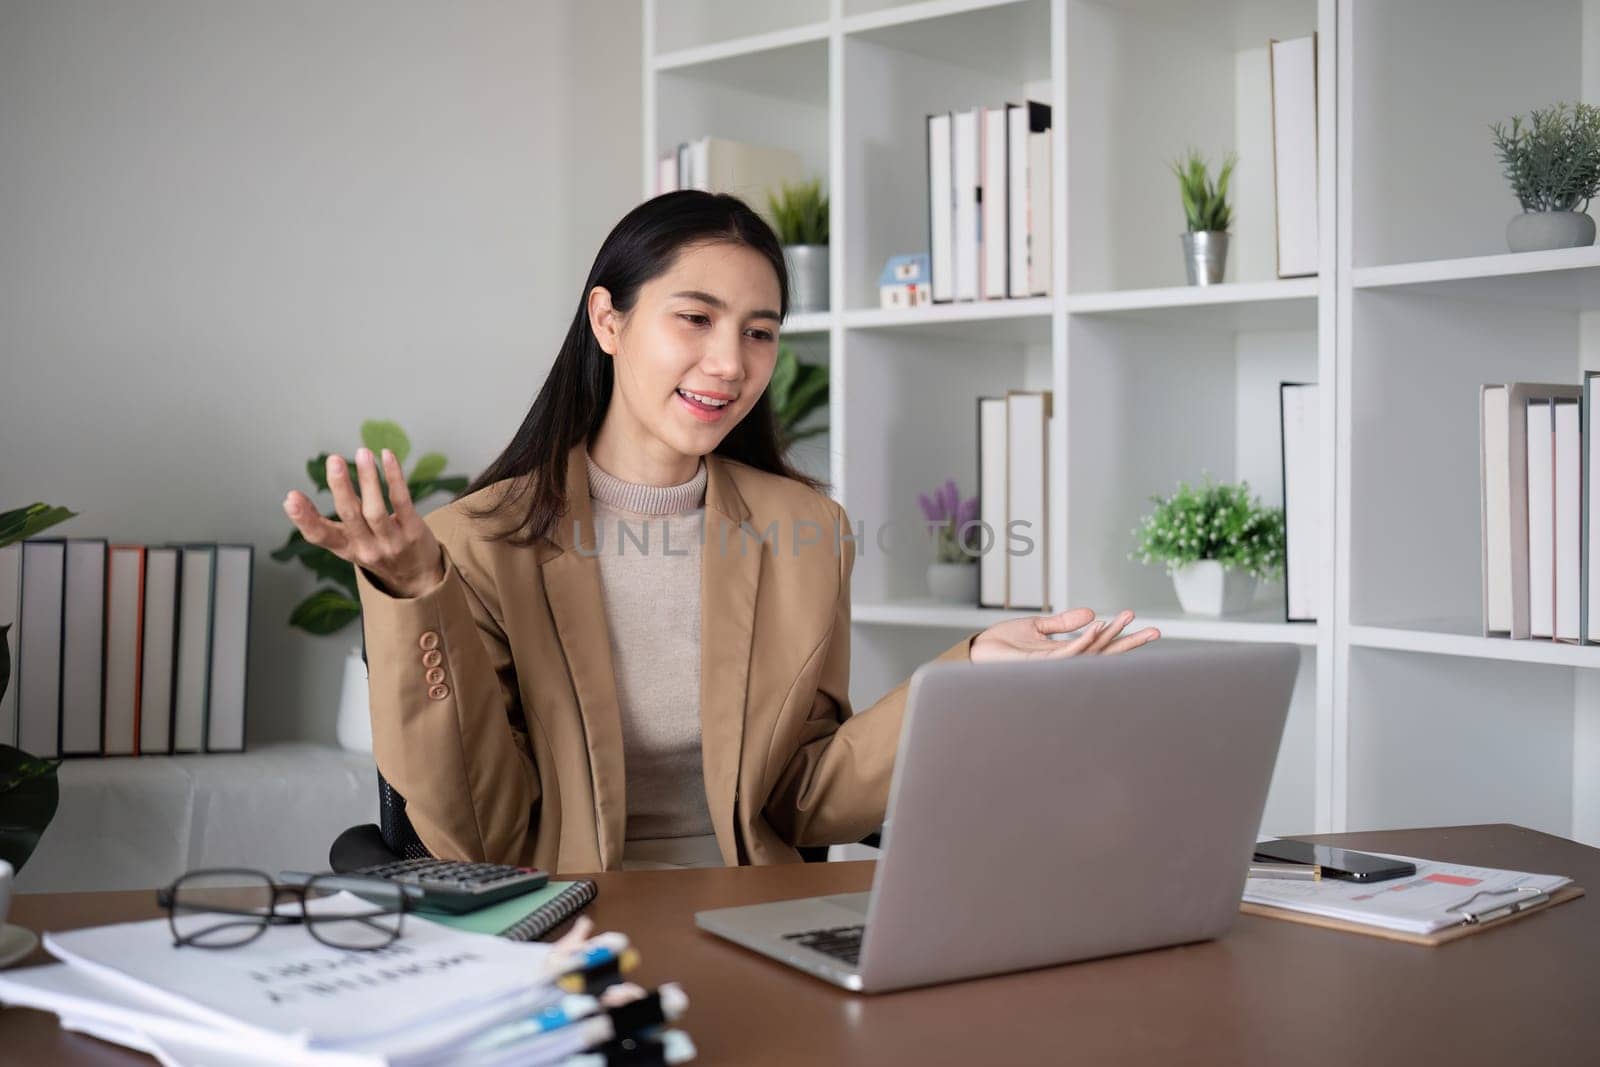 Young Asian business woman sits and works using a laptop in a modern office decorated with shady green plants..